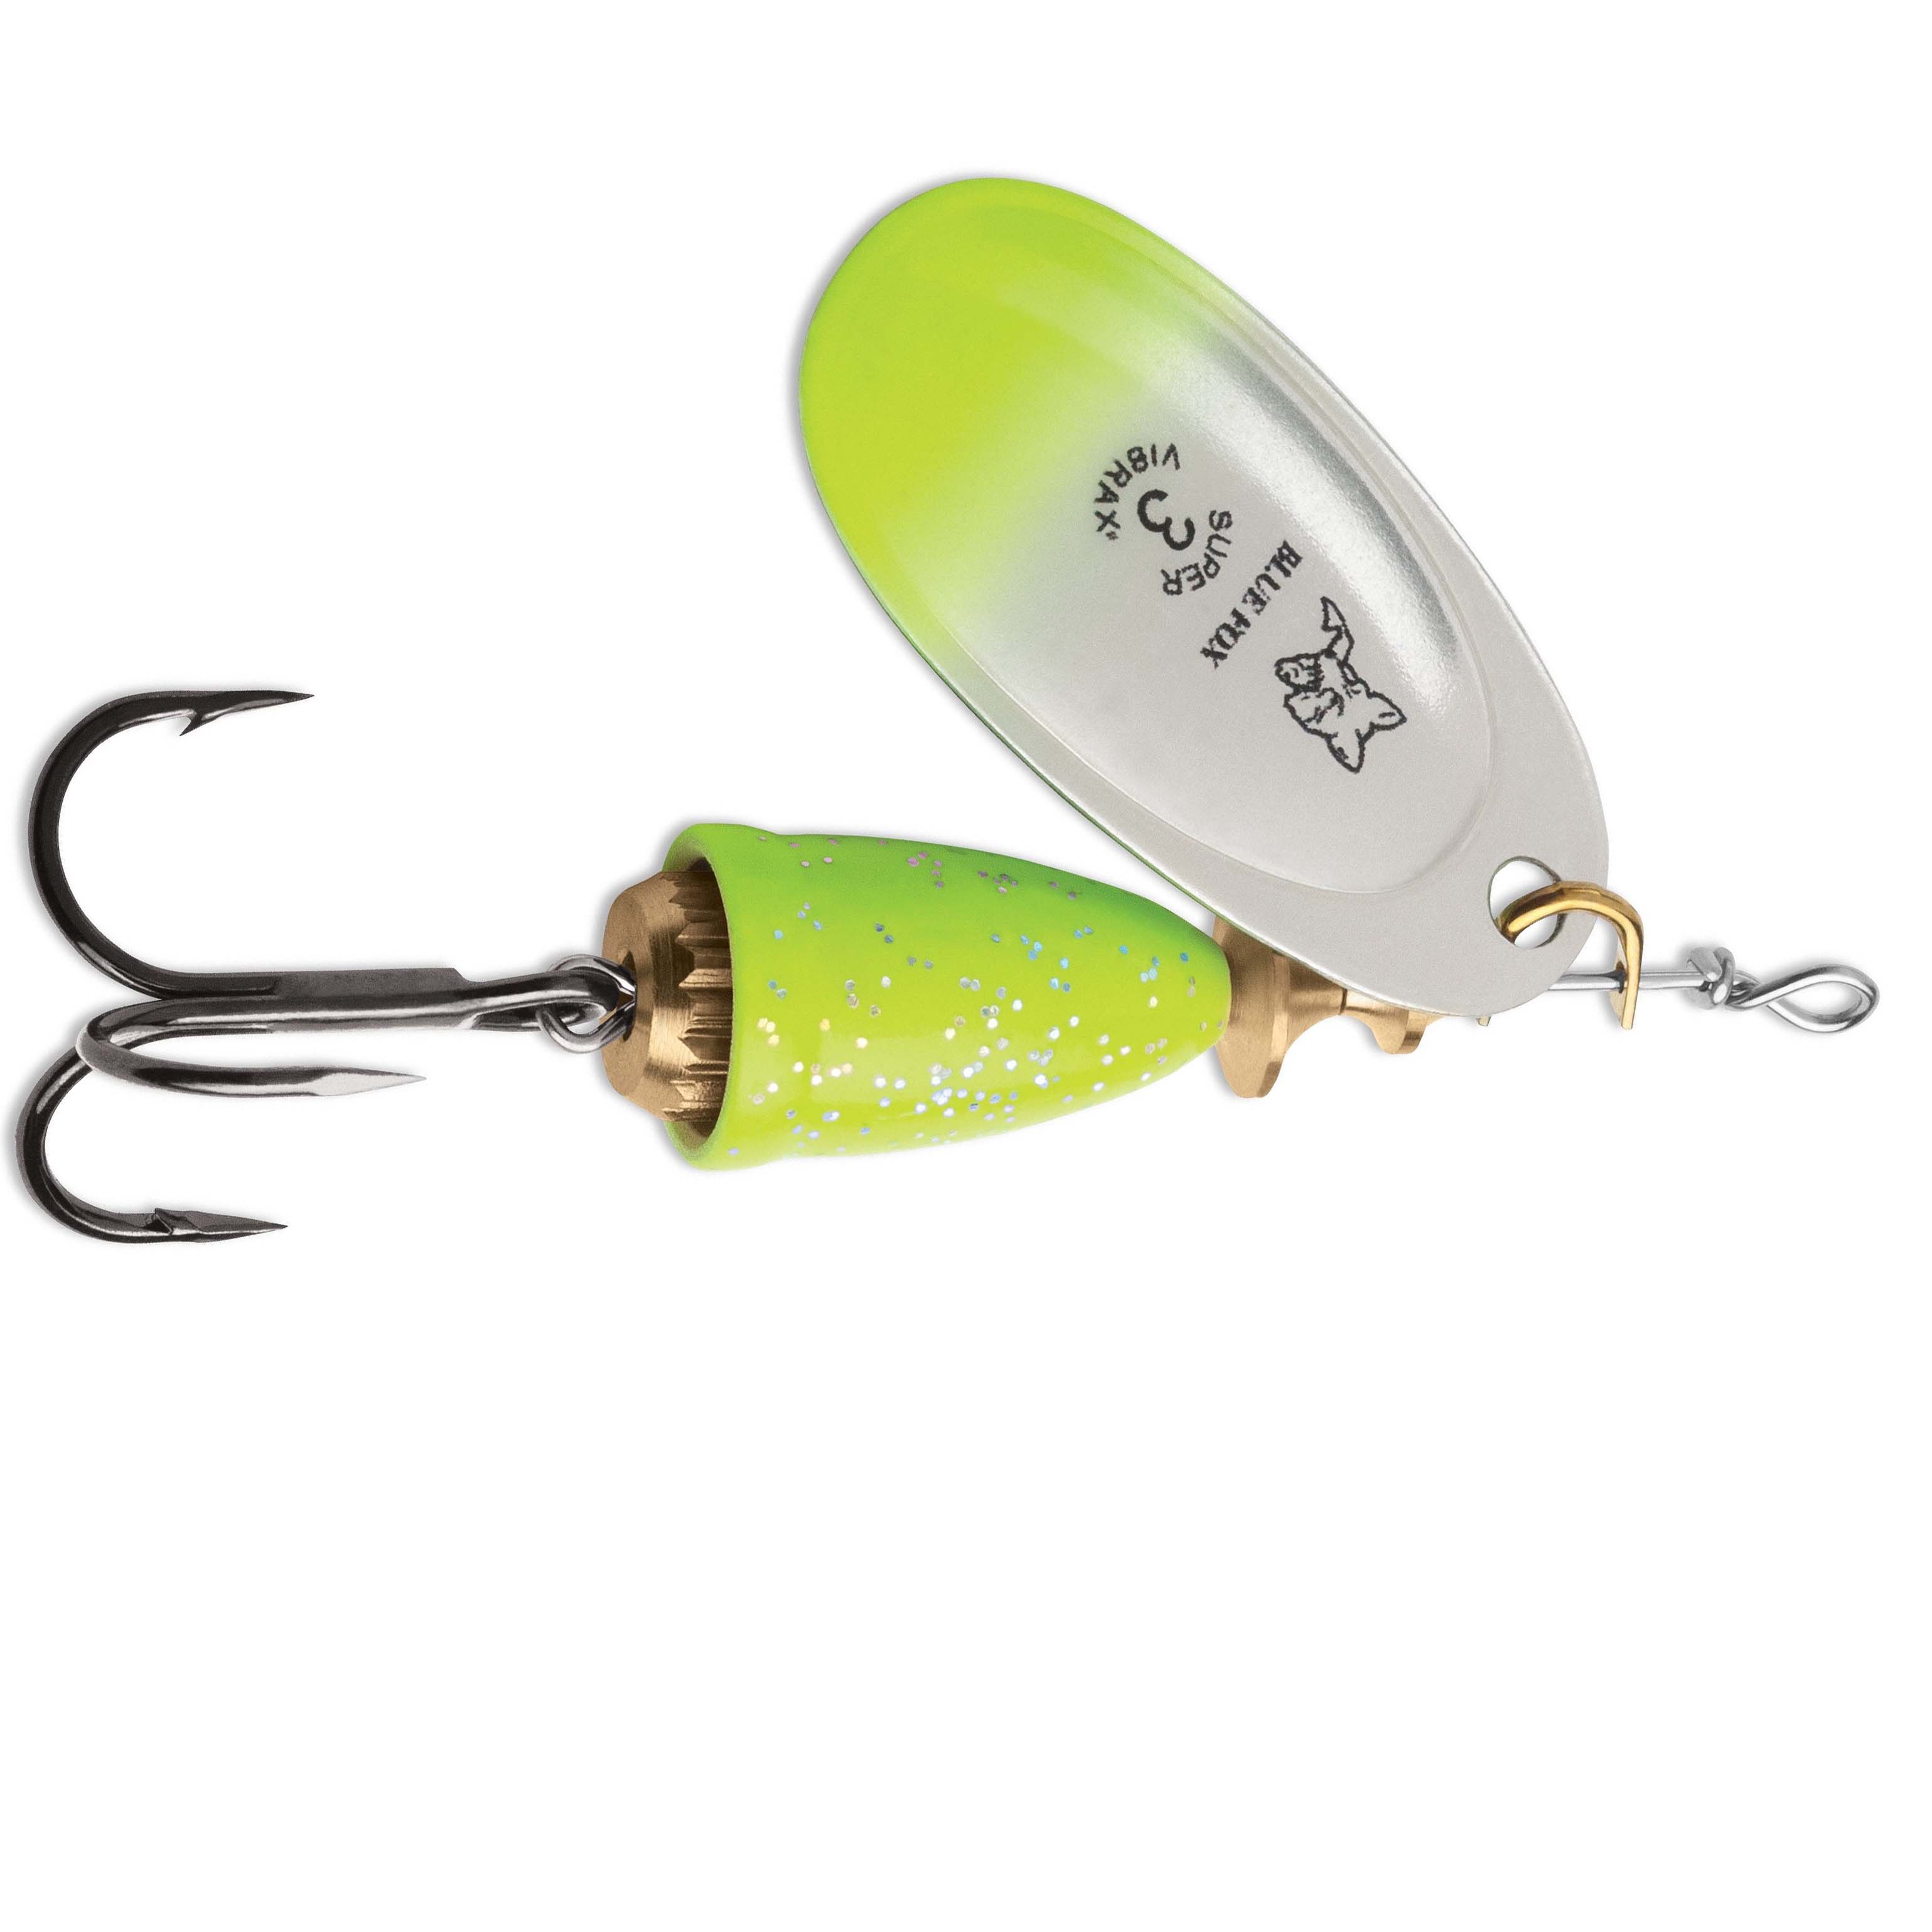 BLUE Fox CANDYBACK CLASSIC VIBRAX SPINNER 1/4 - 3 chartreuse green